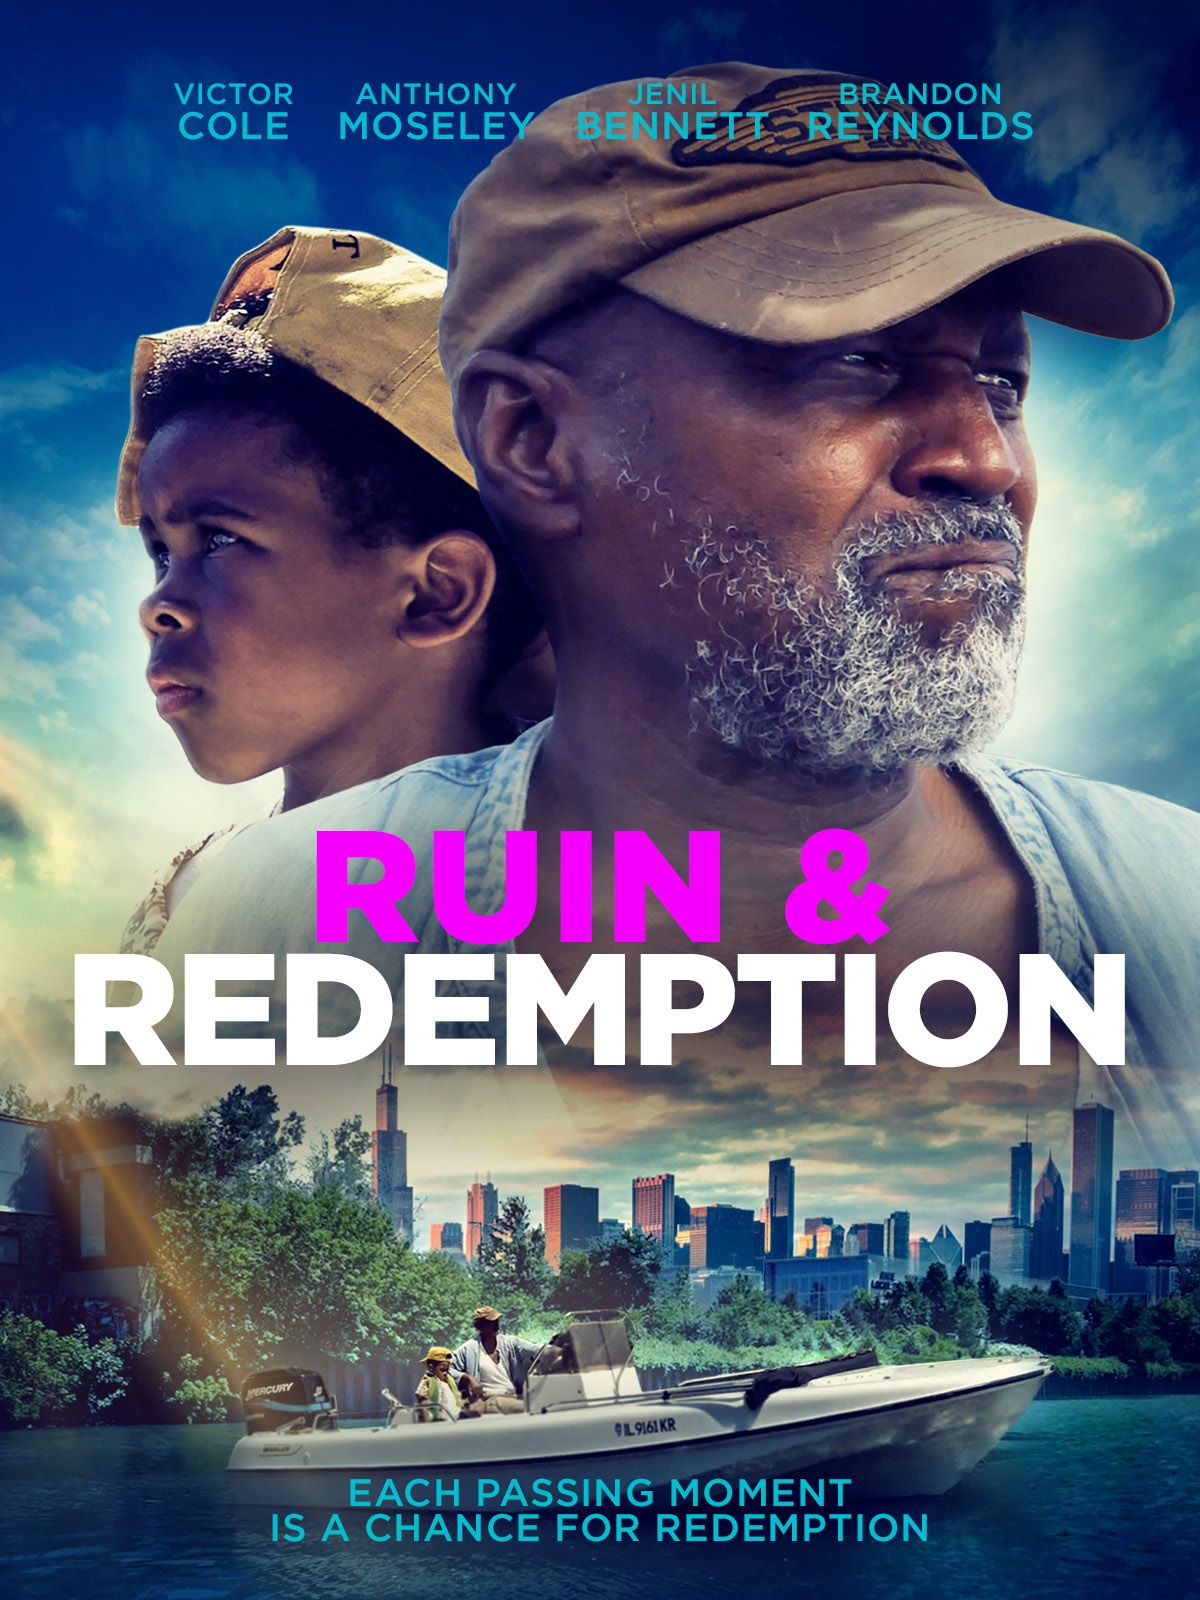 Keyart for the movie Ruin & Redemption